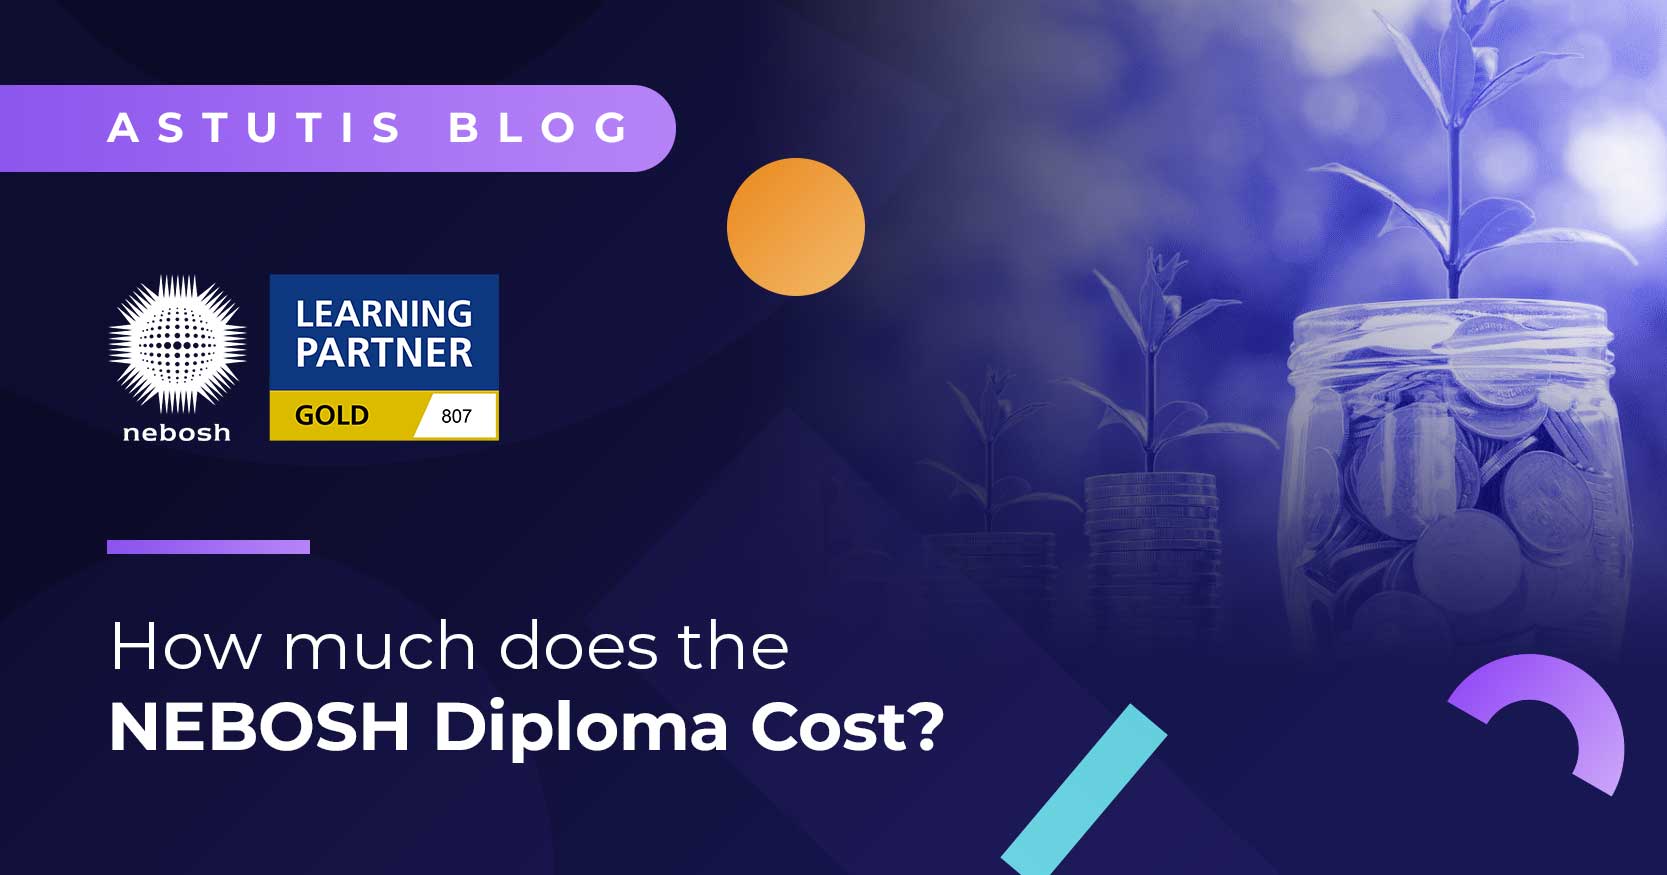 How Much Does the NEBOSH Diploma Cost? Image